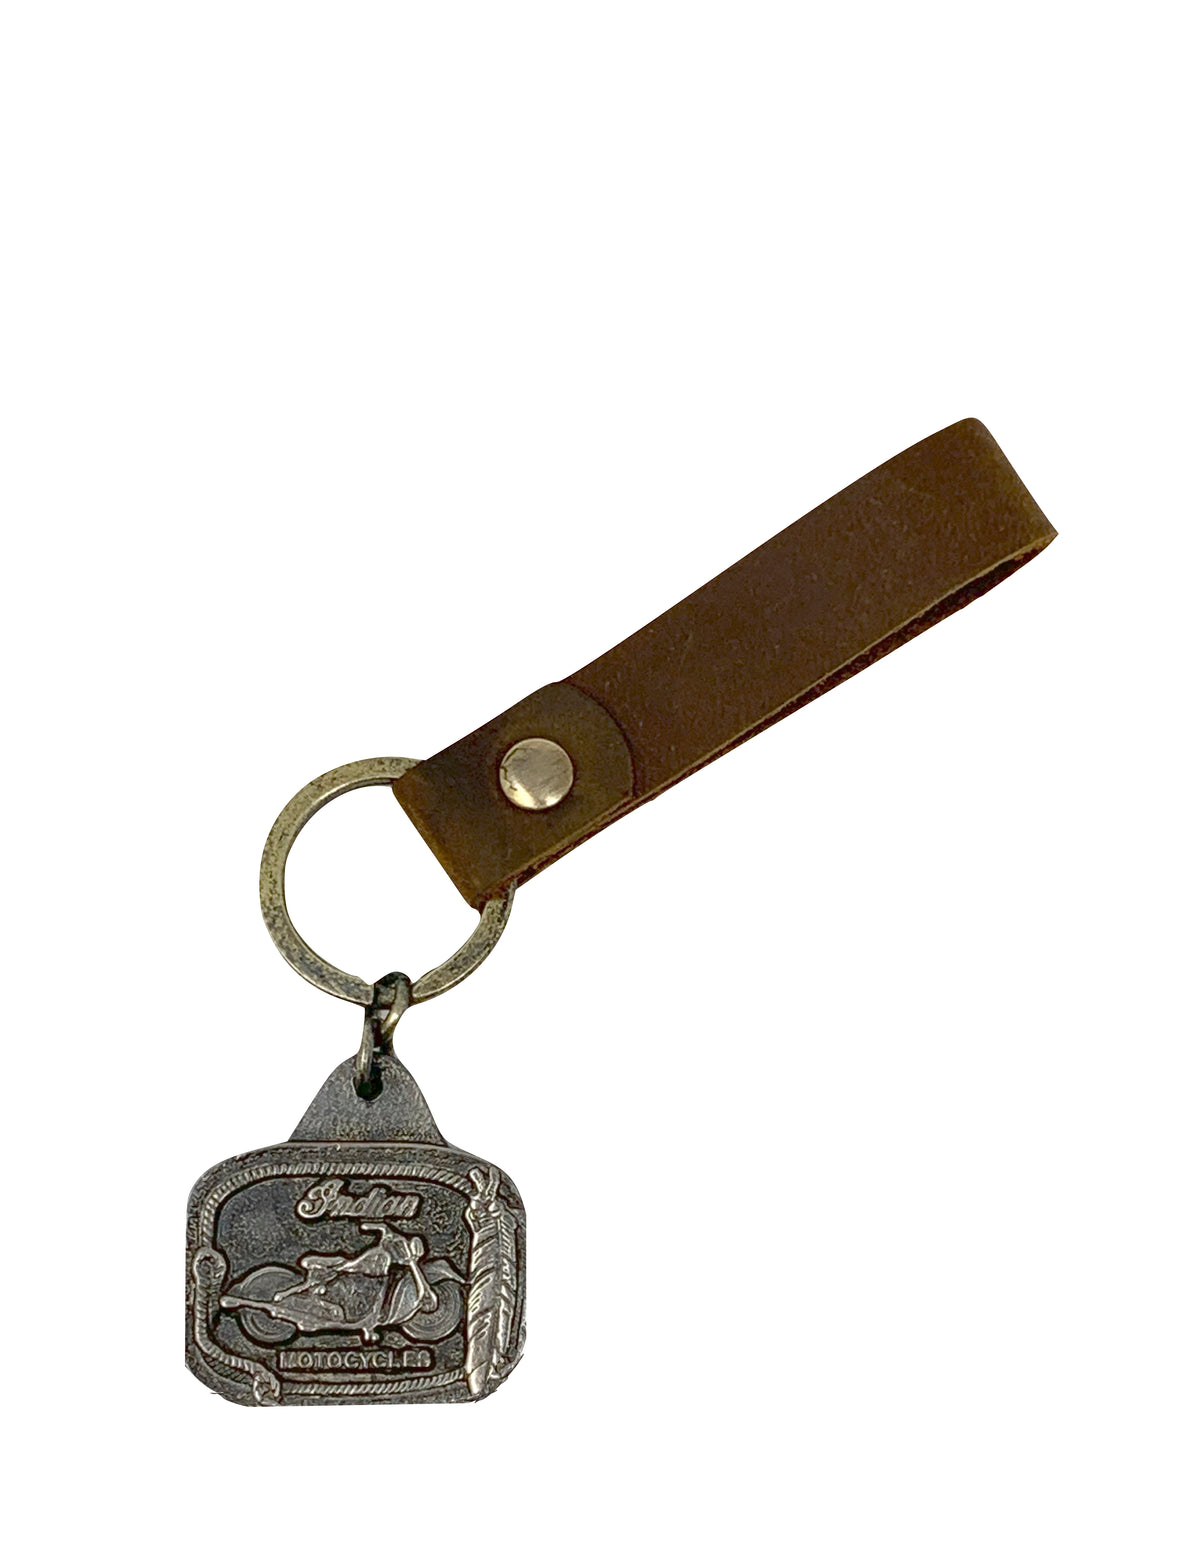 Vintage Indian Motorcycle Leather Key Fob